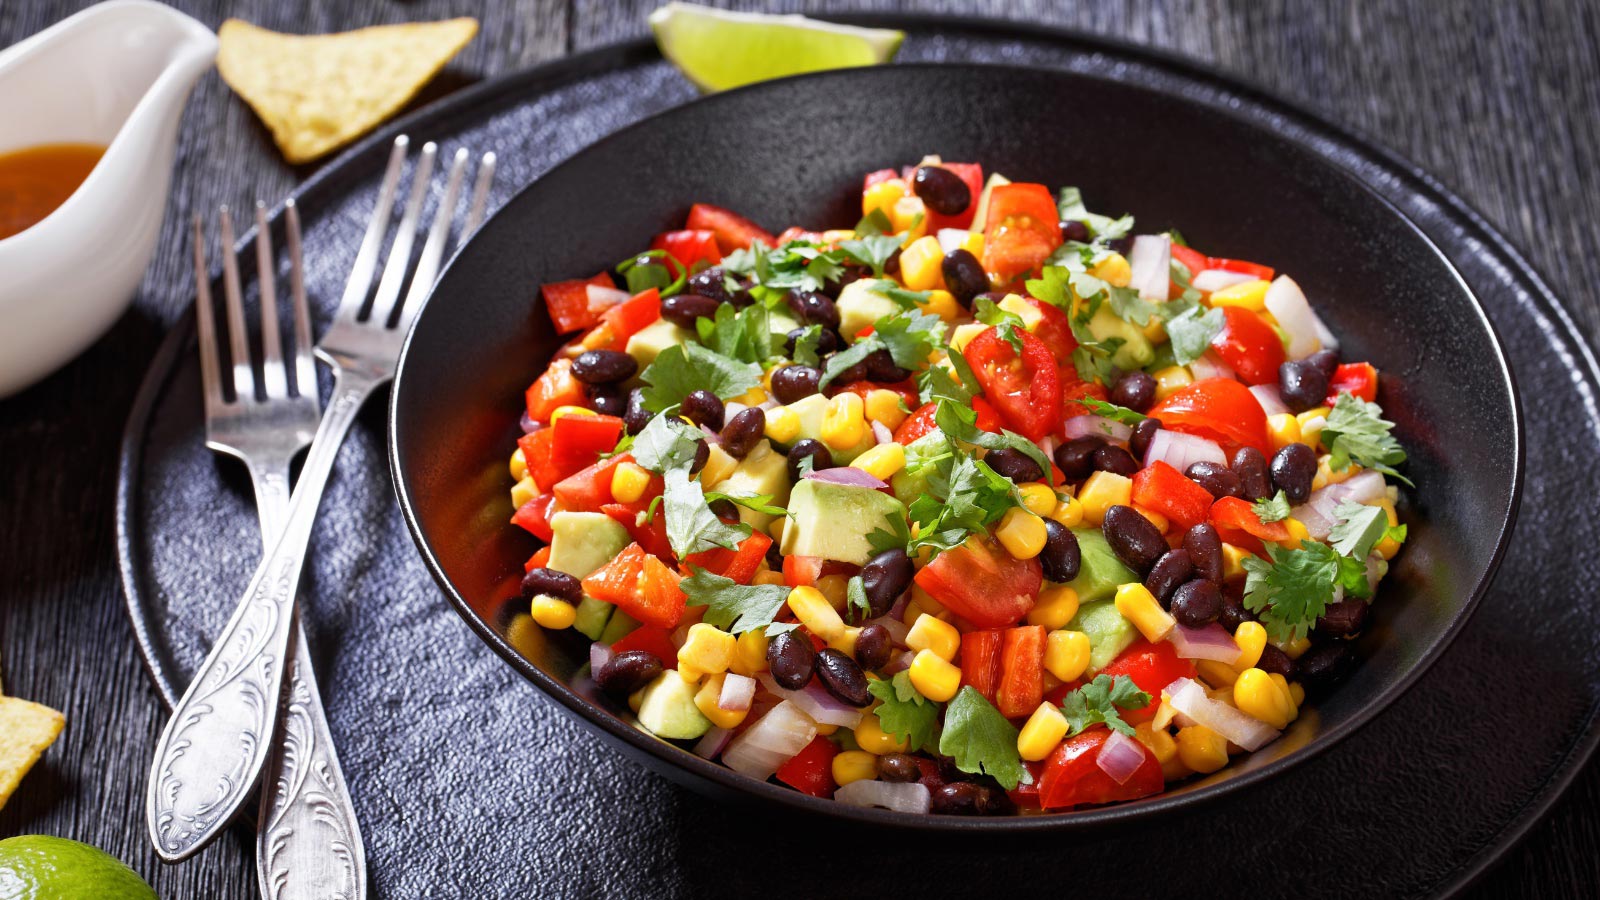 Corn salad, texas caviar with black bean, tomatoes, avocado, red bell pepper, corn, coriander in black bowl on dark wooden table, horizontal view.